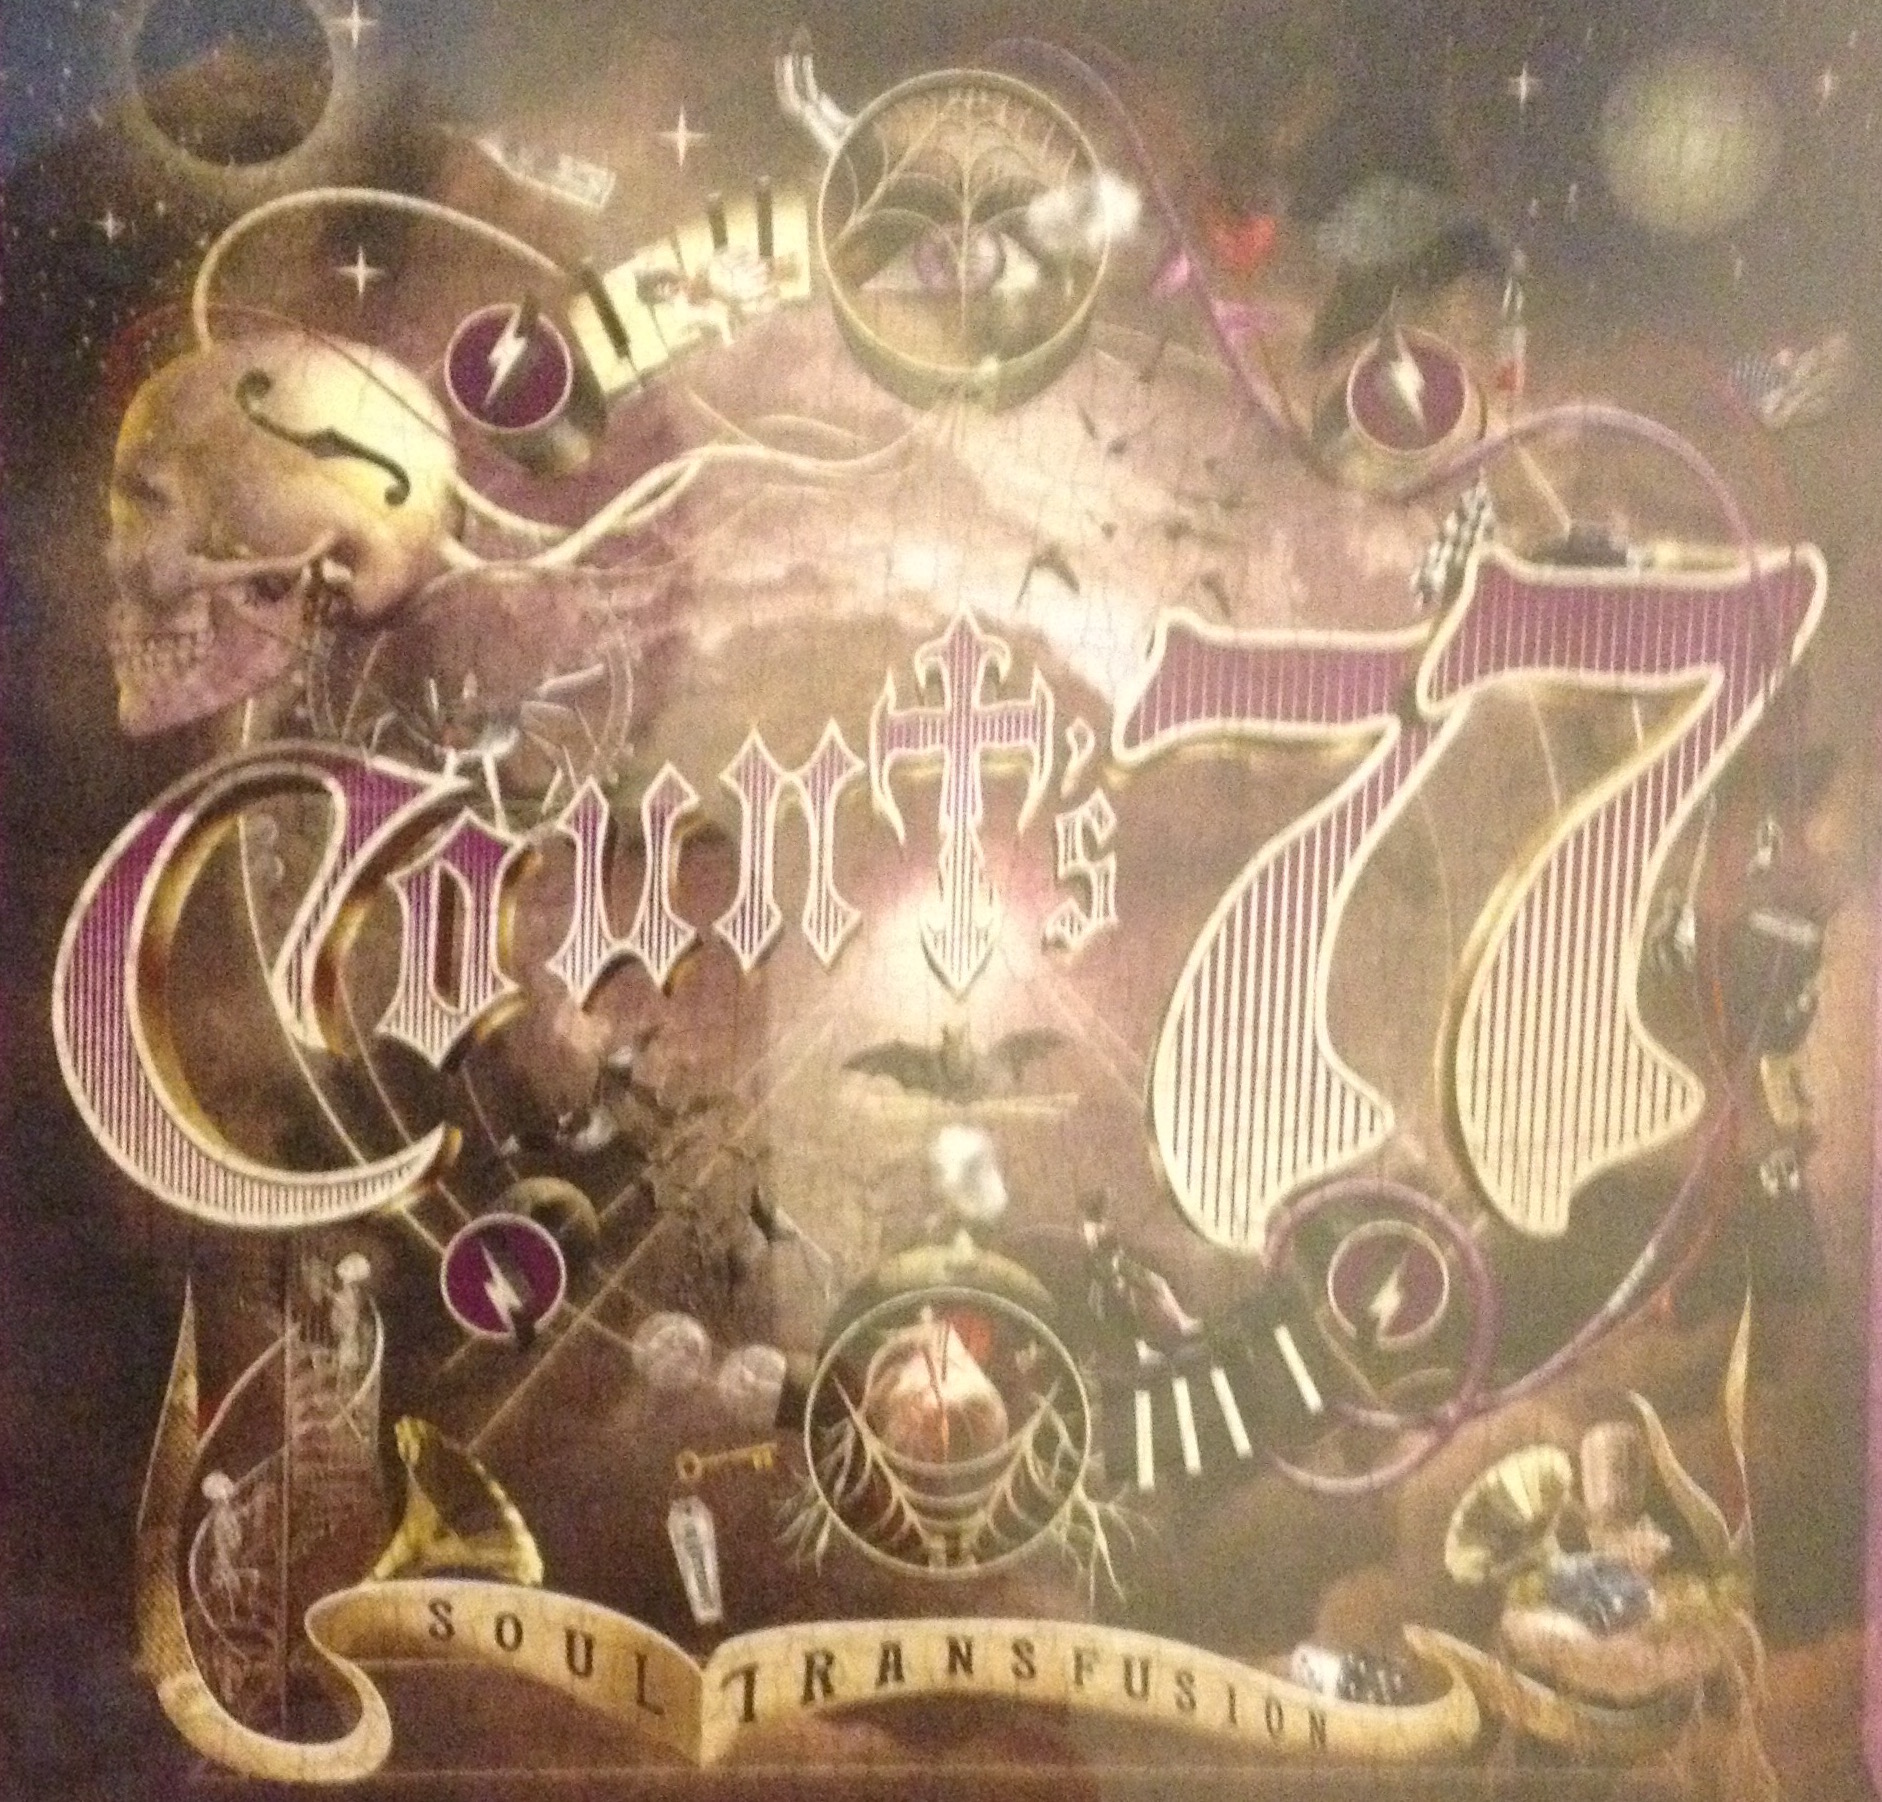 Count’s 77 – Soul Transfusion is the Second Album from Sin City’s Finest!